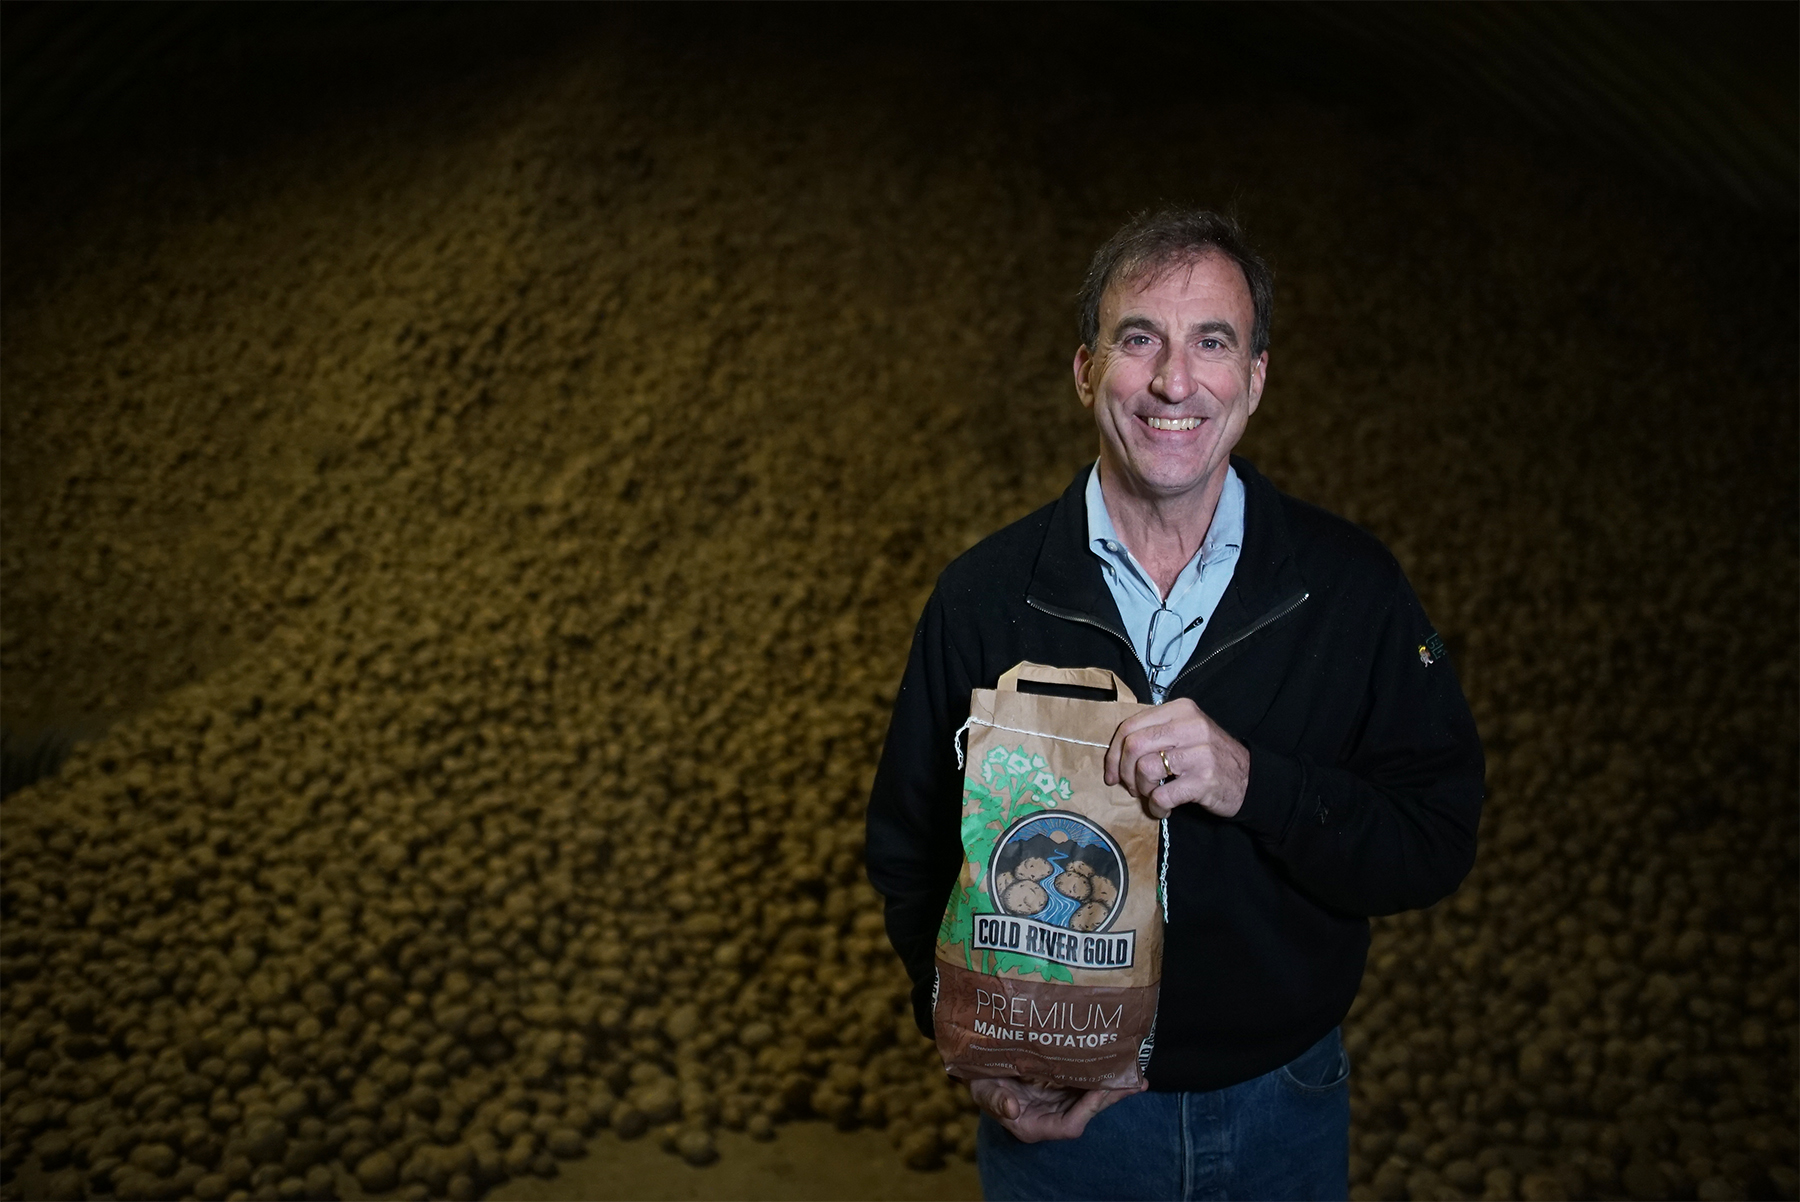 Don Thibodeau, President of Green Thumb Farms in Fryeburg, Maine, holds a new bag of Cold River Gold potatoes.